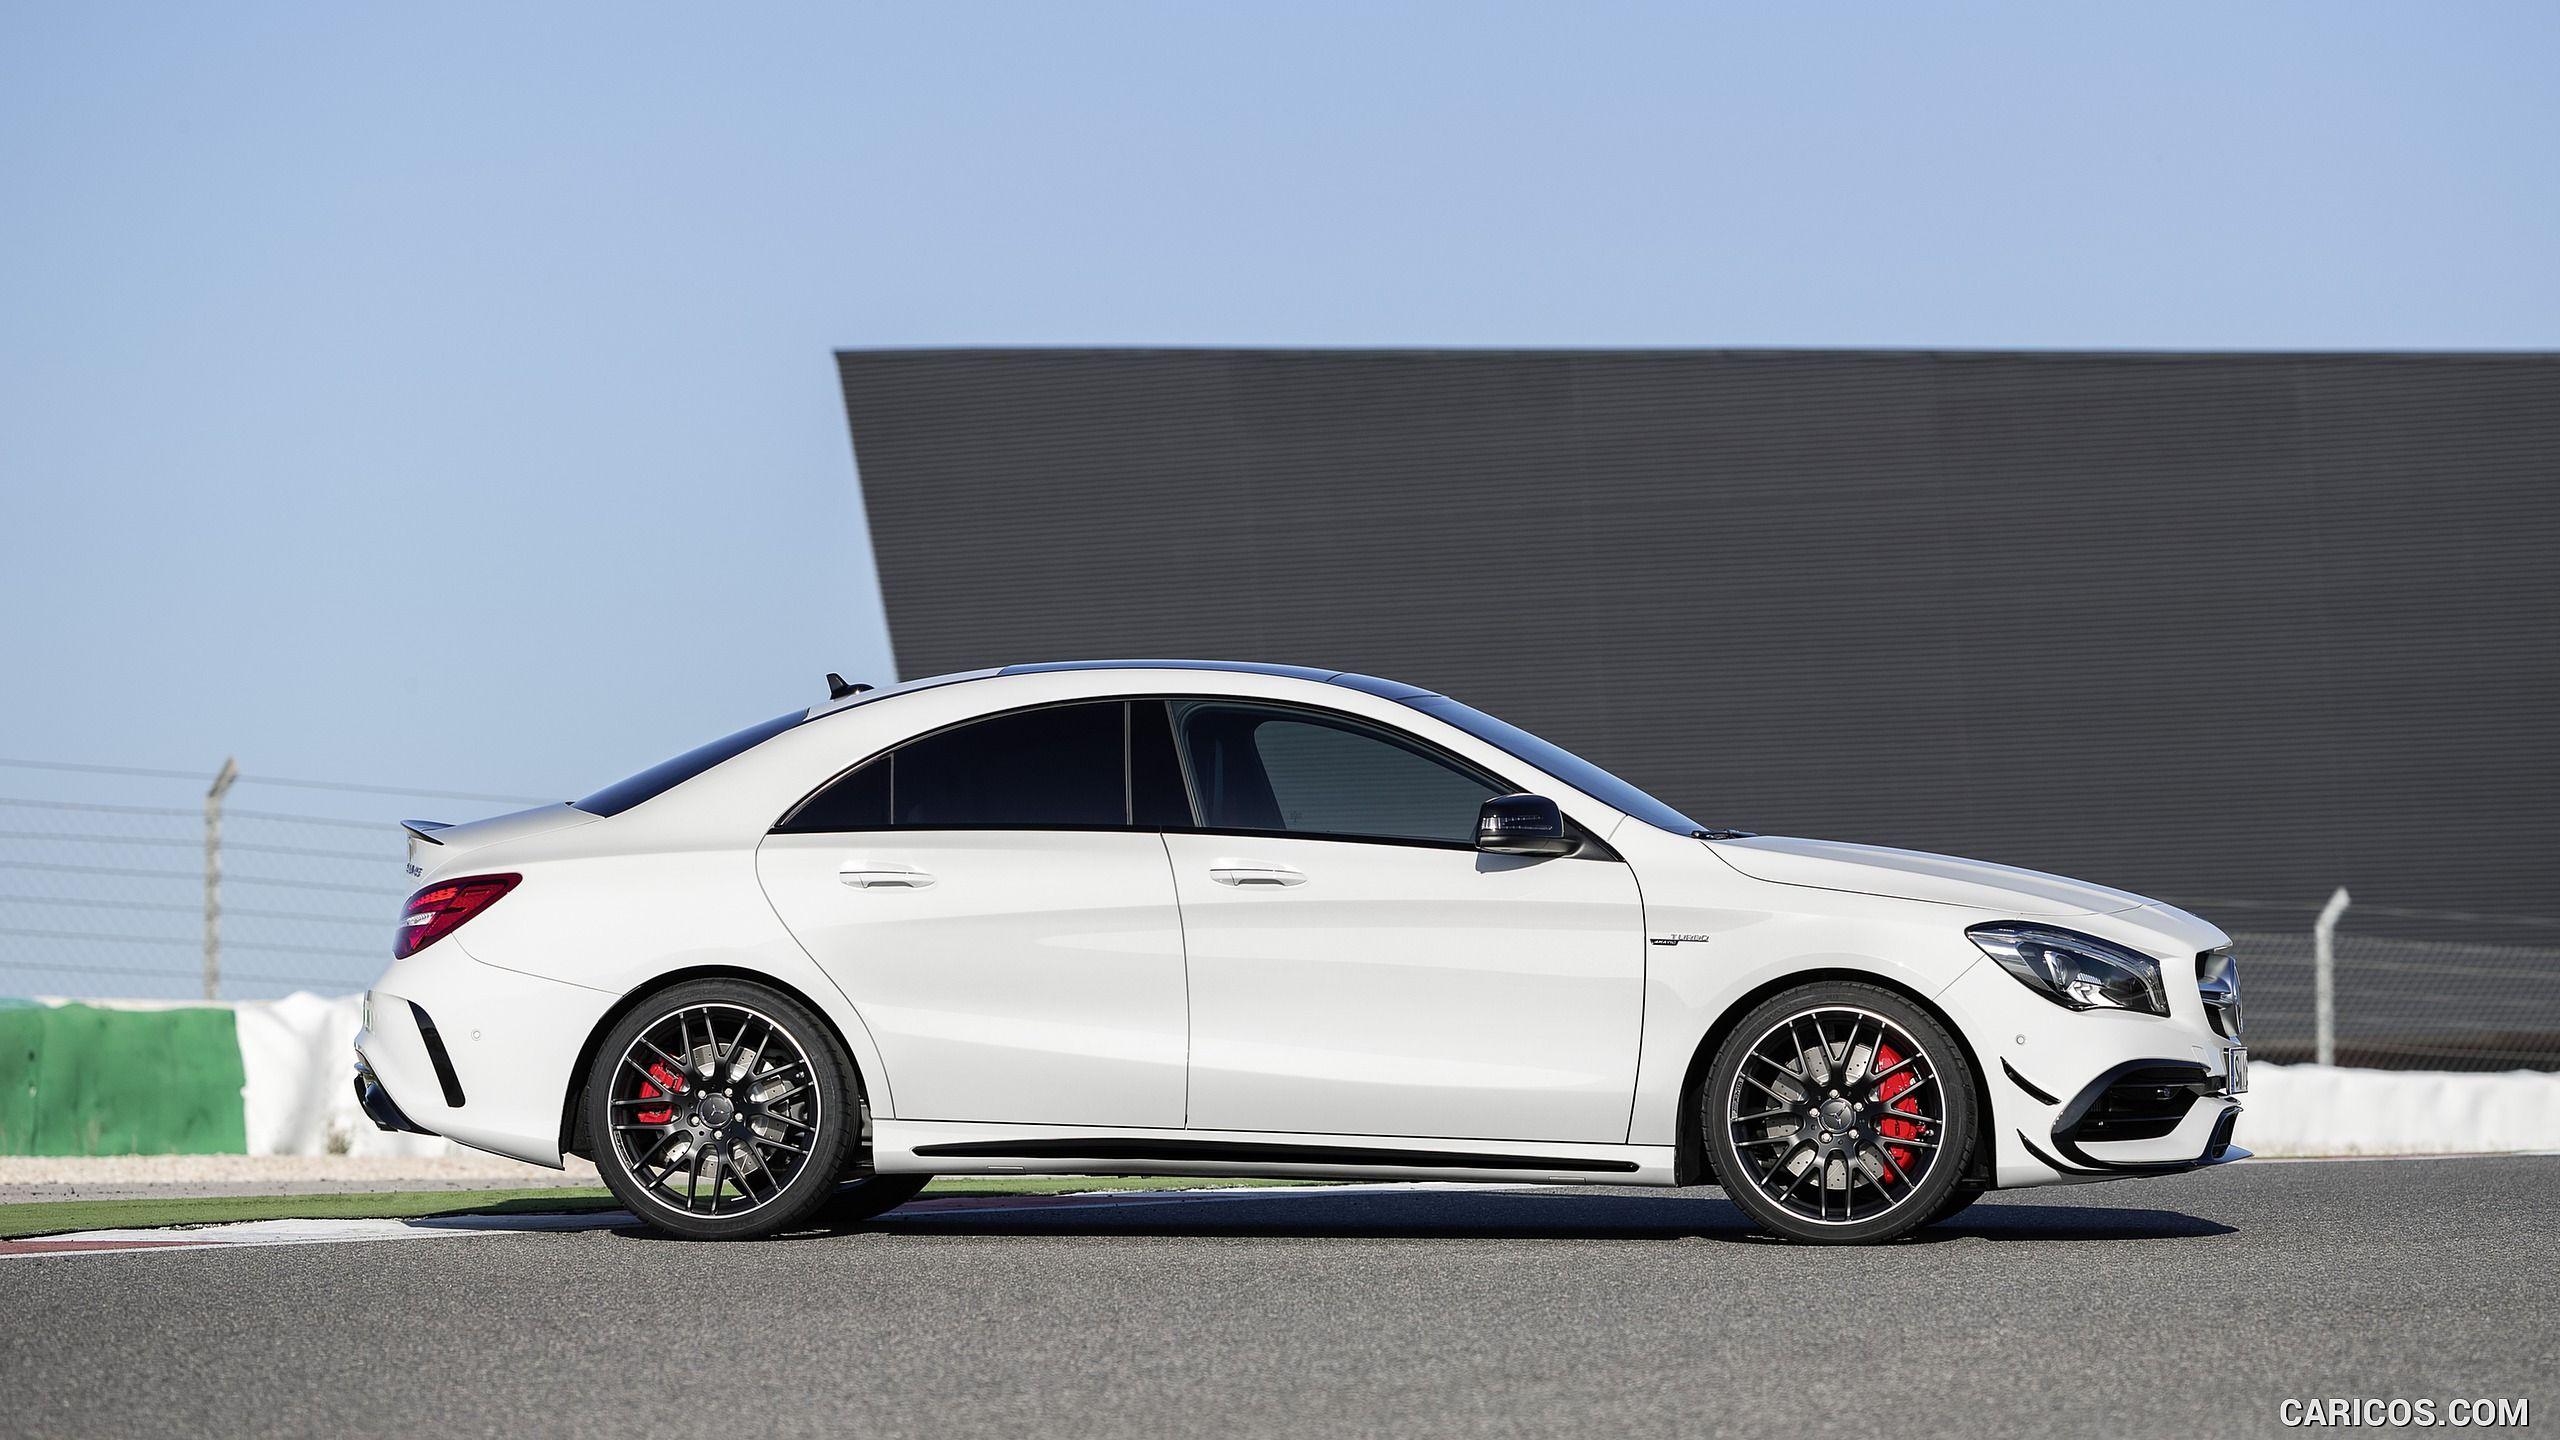 Mercedes AMG CLA 45 Wallpaper. Things To Fill The Garage